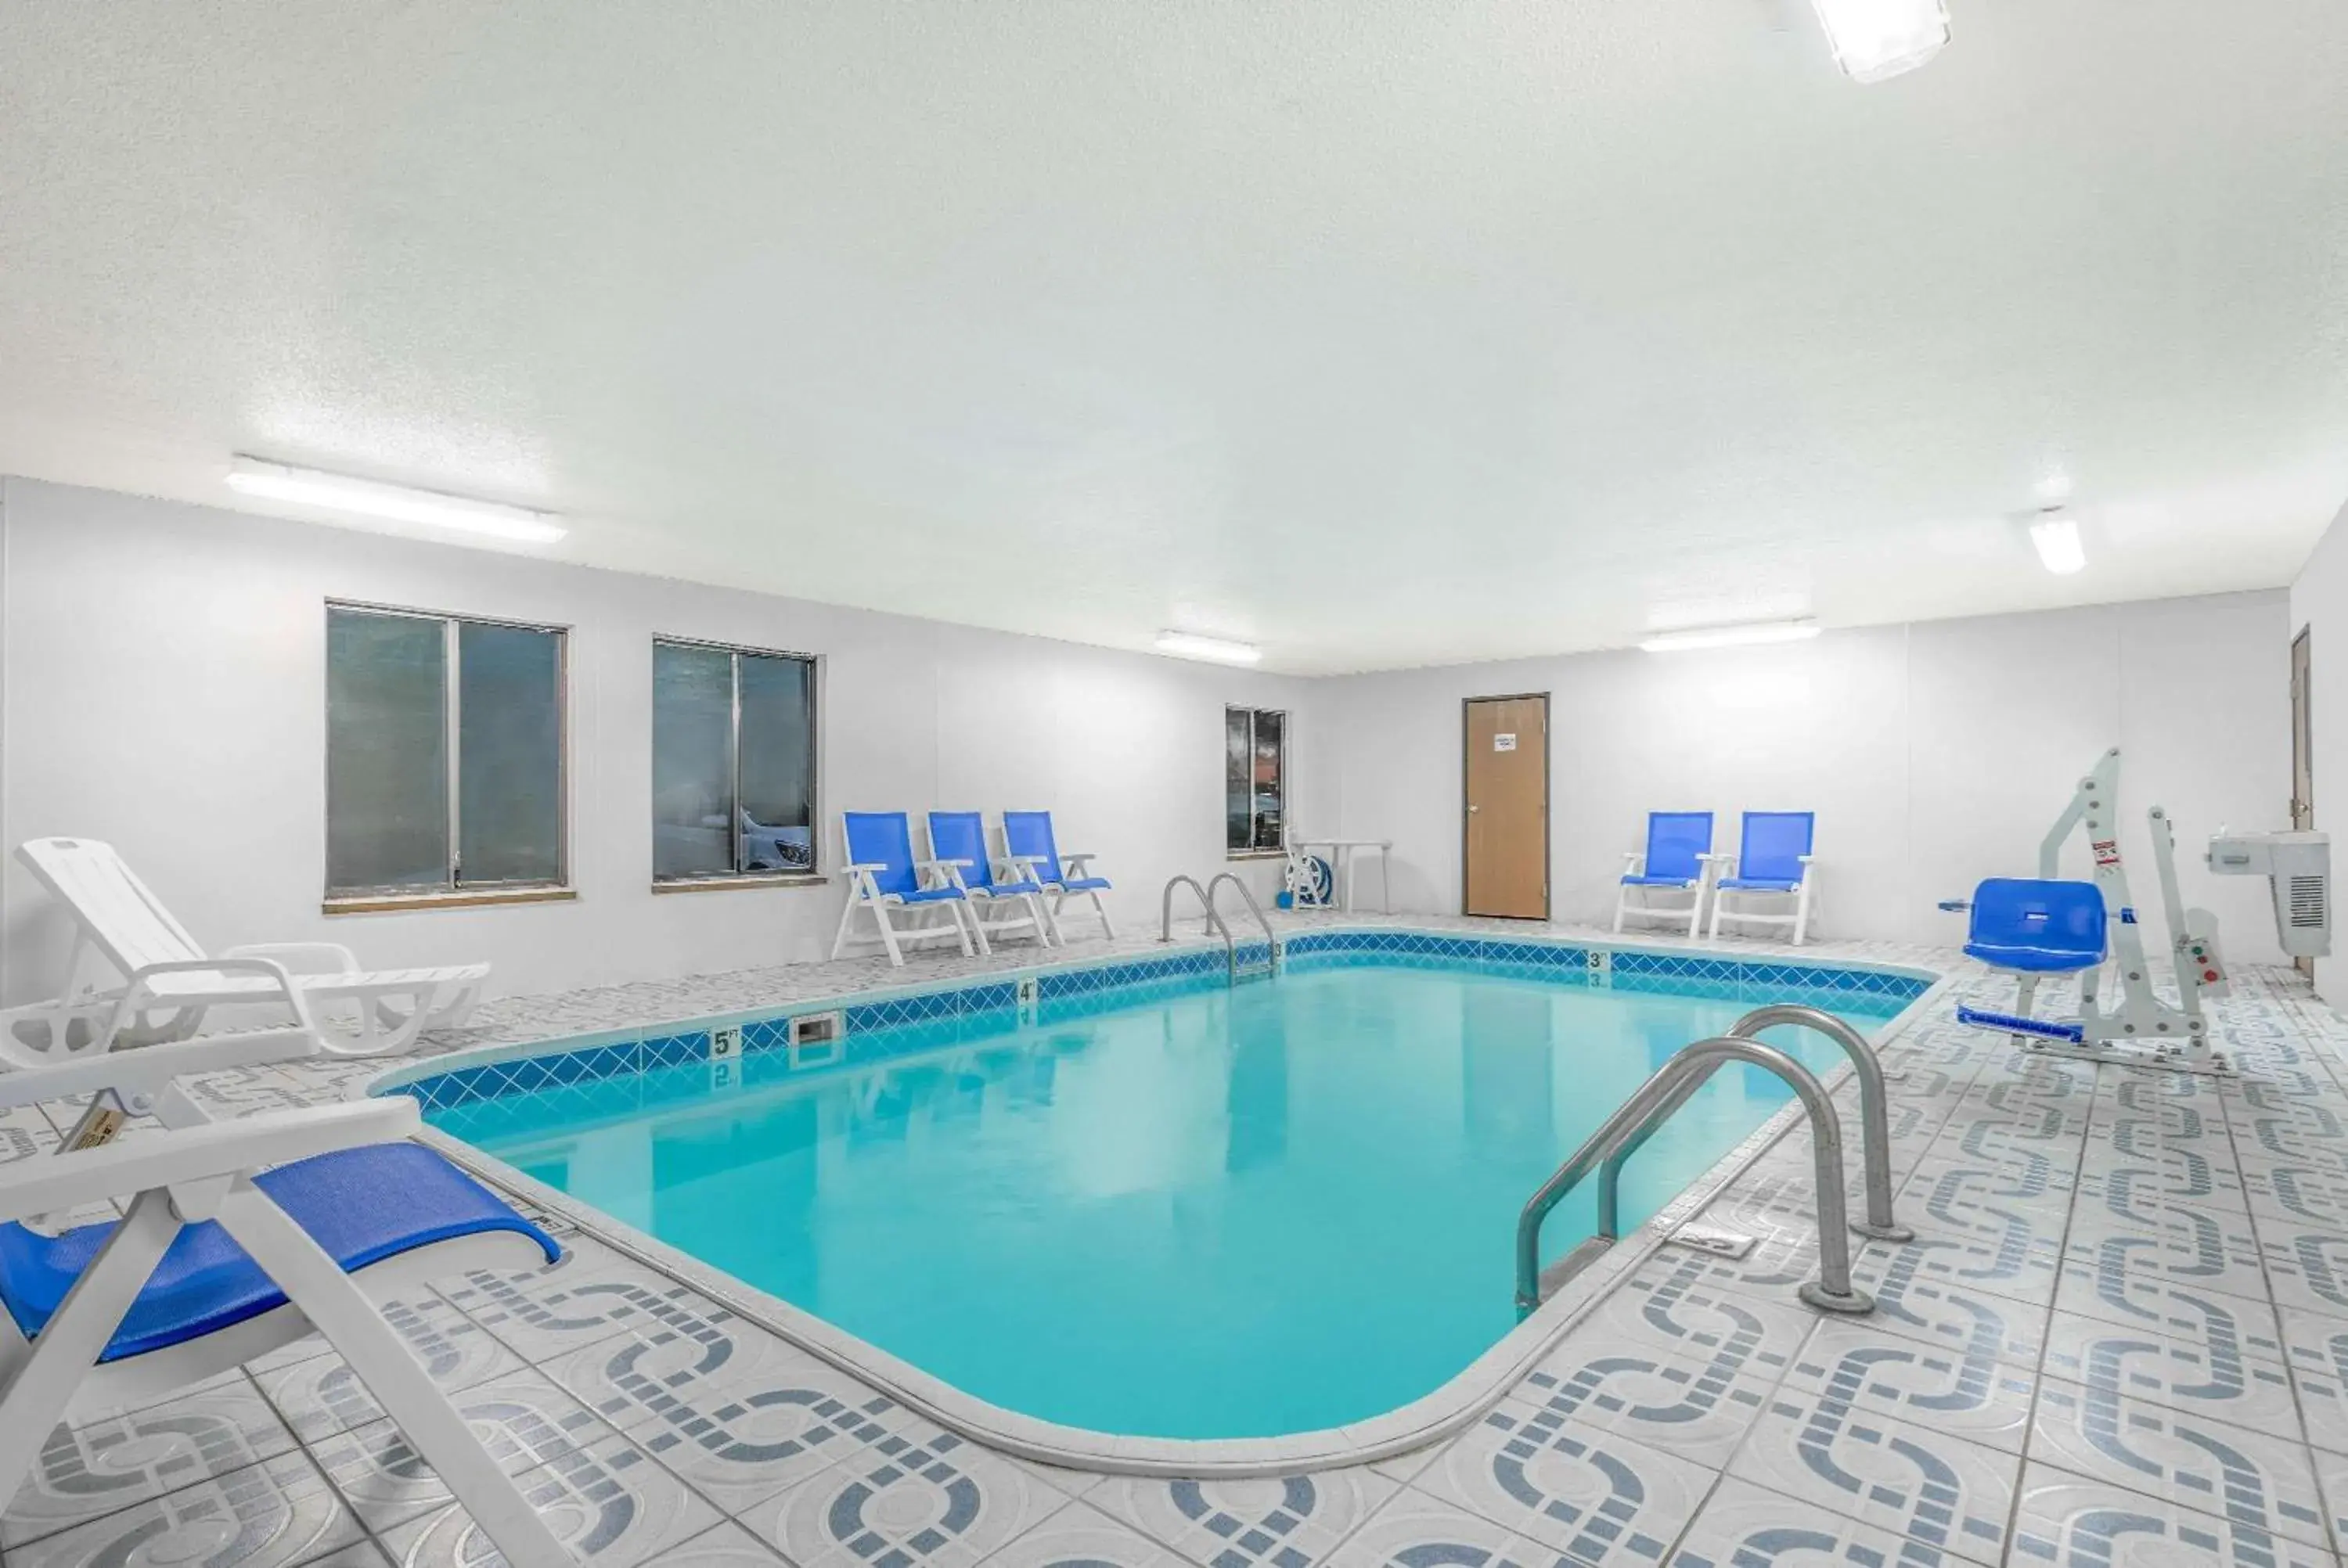 On site, Swimming Pool in Super 8 by Wyndham Vincennes